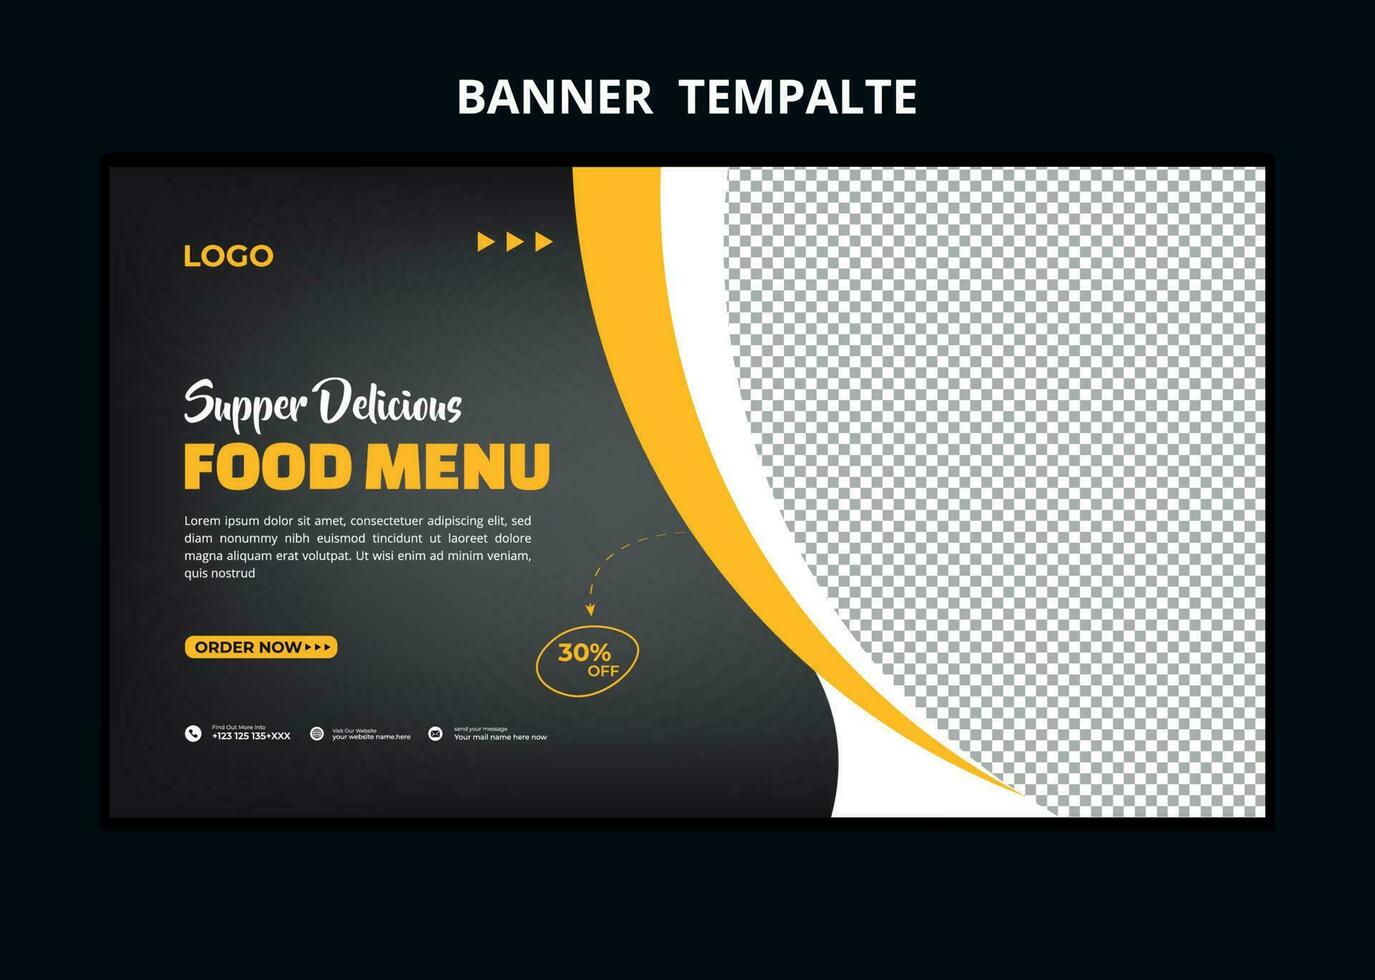 Restaurant food menu social media marketing web banner. Pizza, burger or hamburger online sale promotion video thumbnail. Fast food website background. Food flyer with logo and business icon. vector